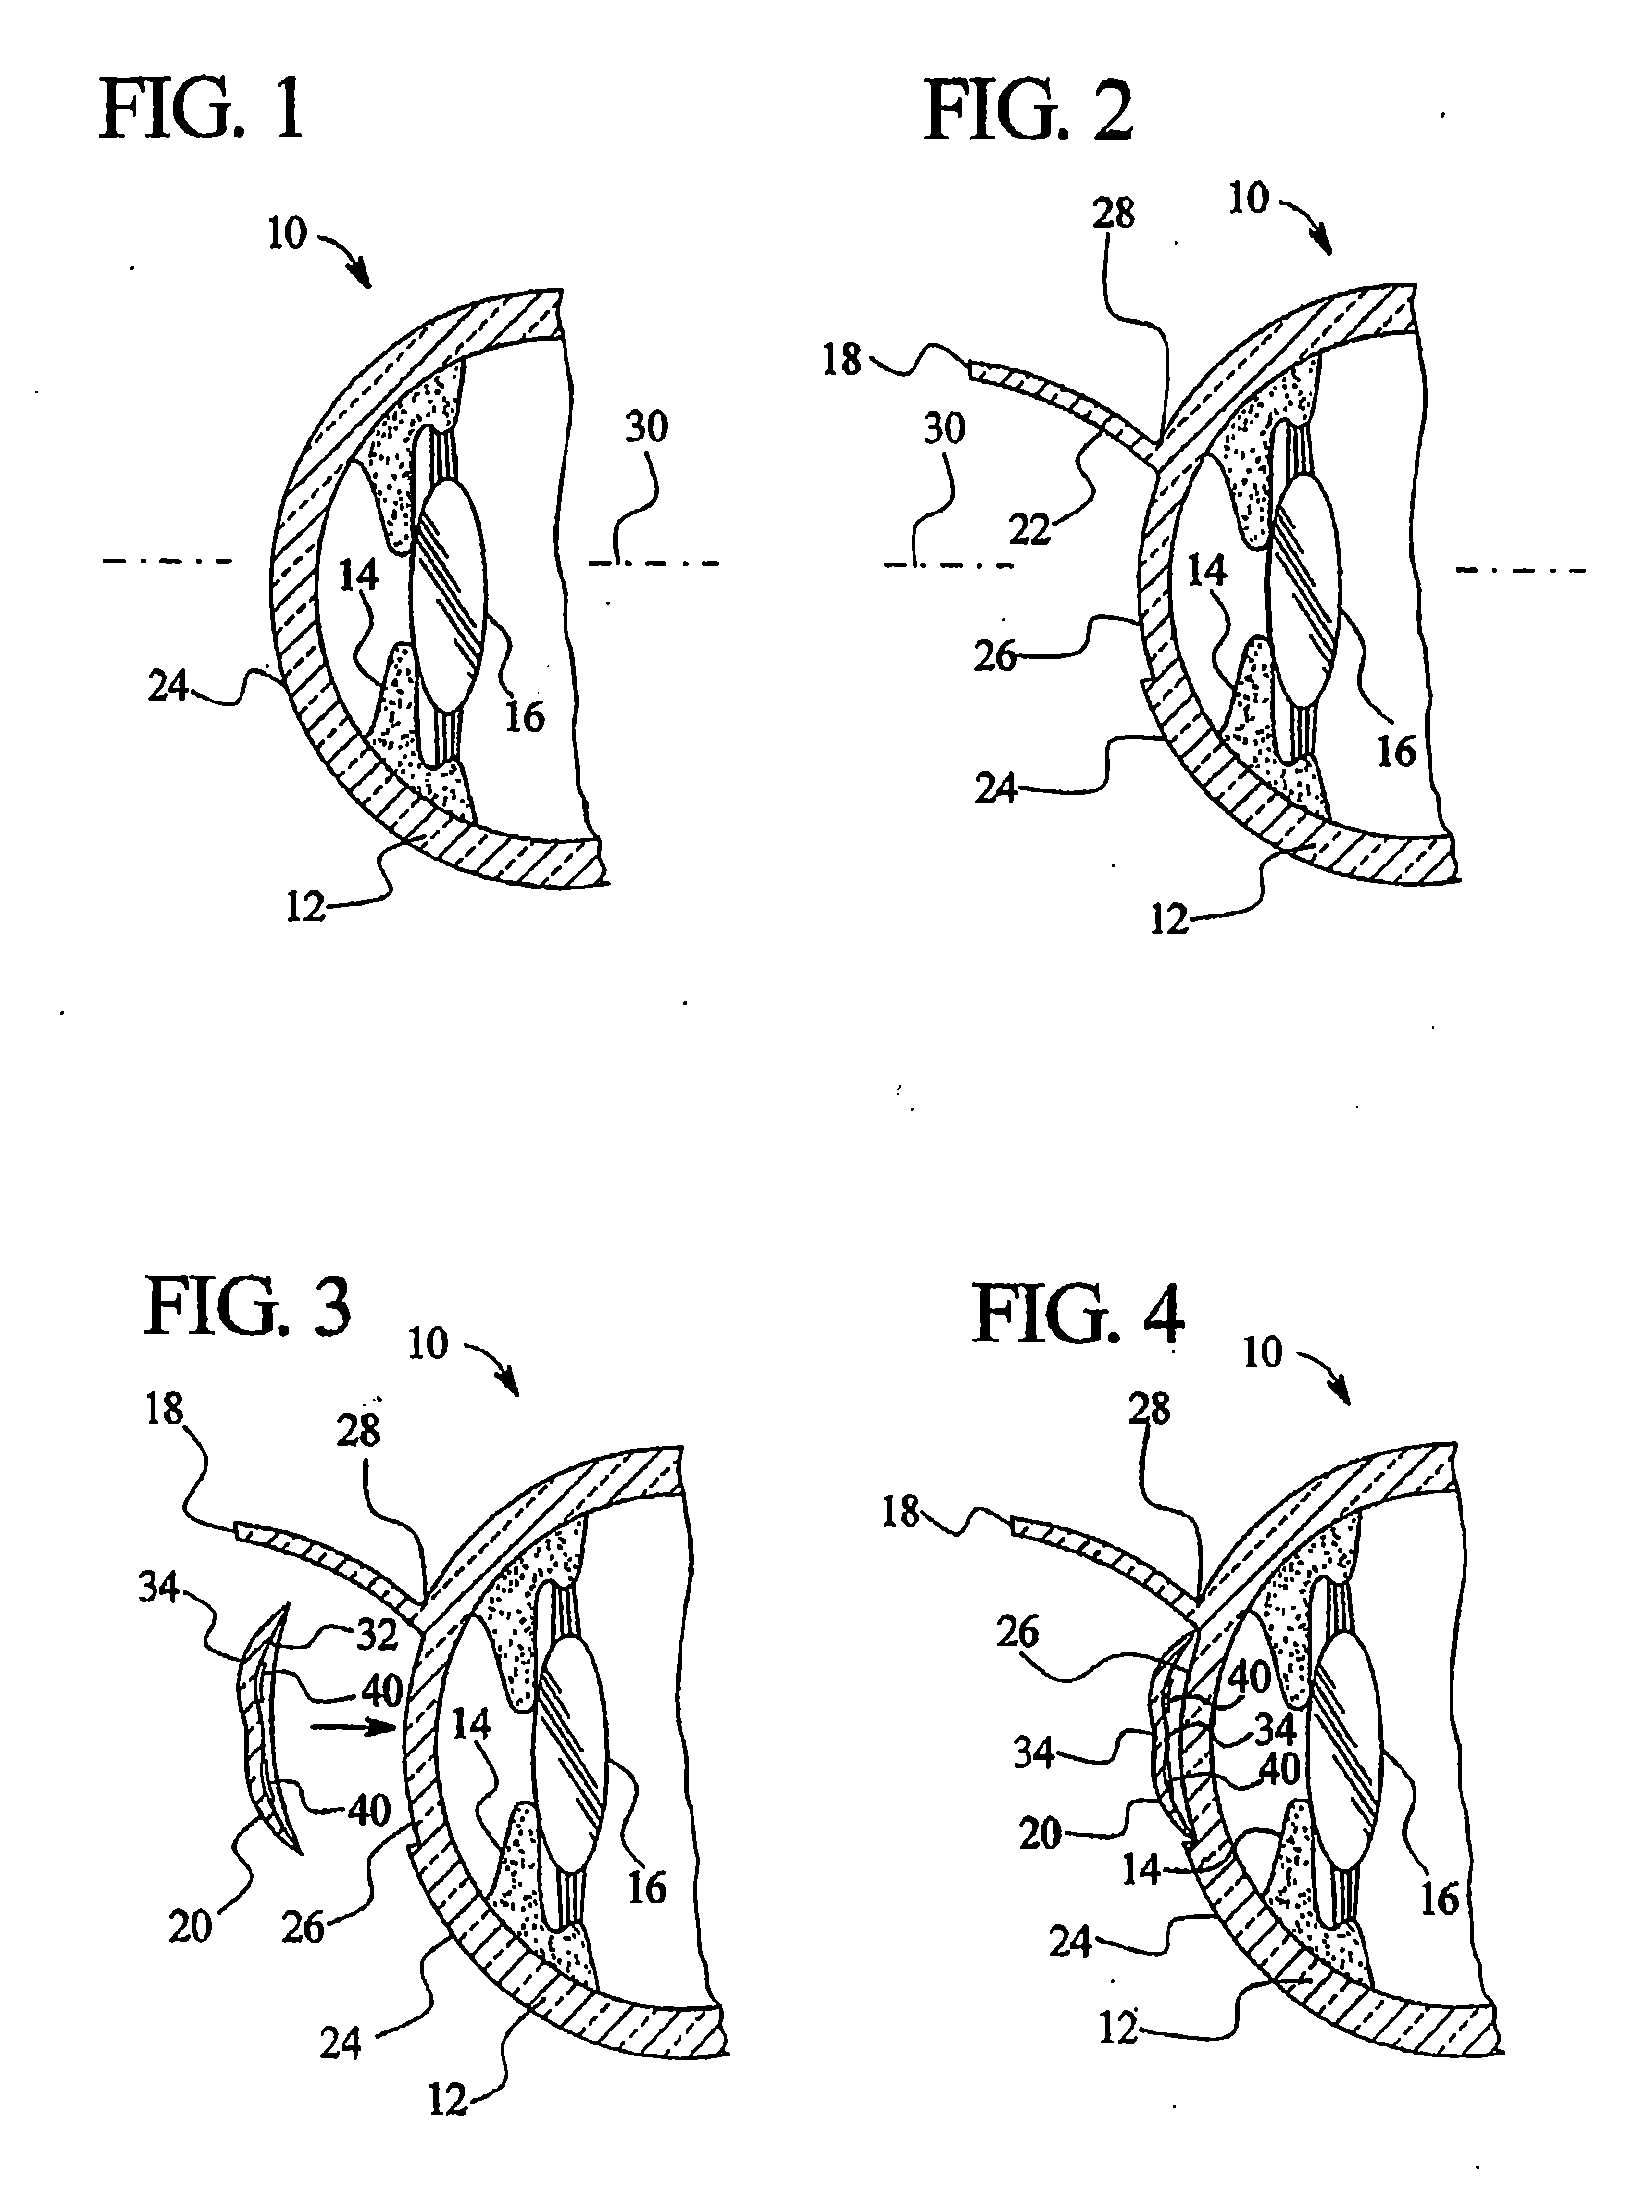 Method of treating the eye using controlled heat delivery